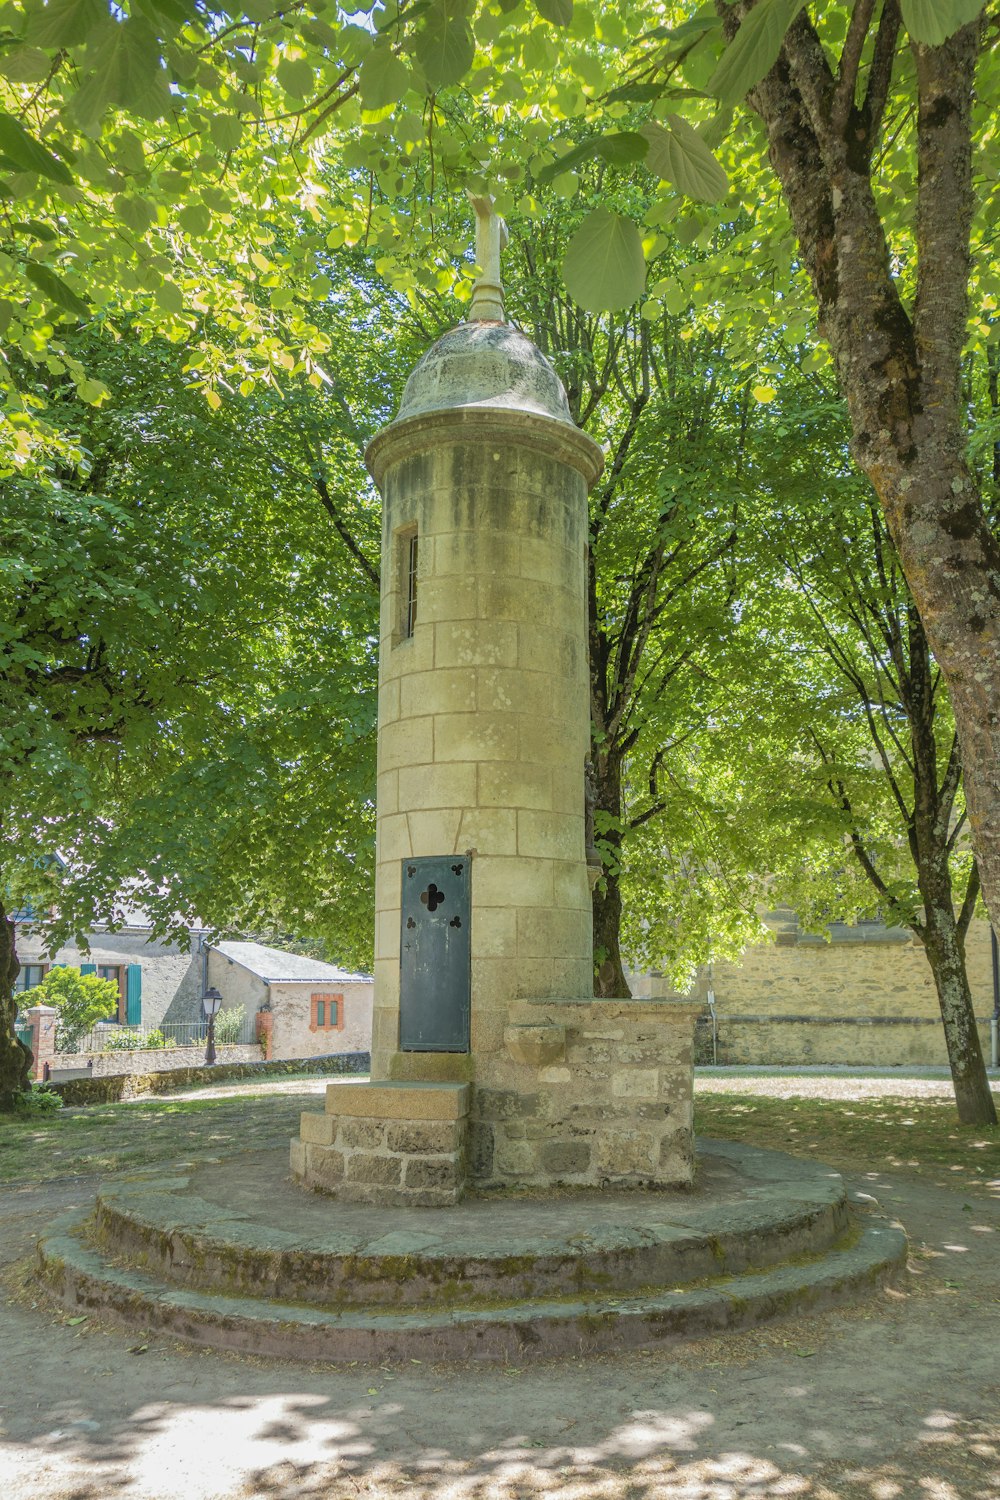 a stone tower in a park surrounded by trees